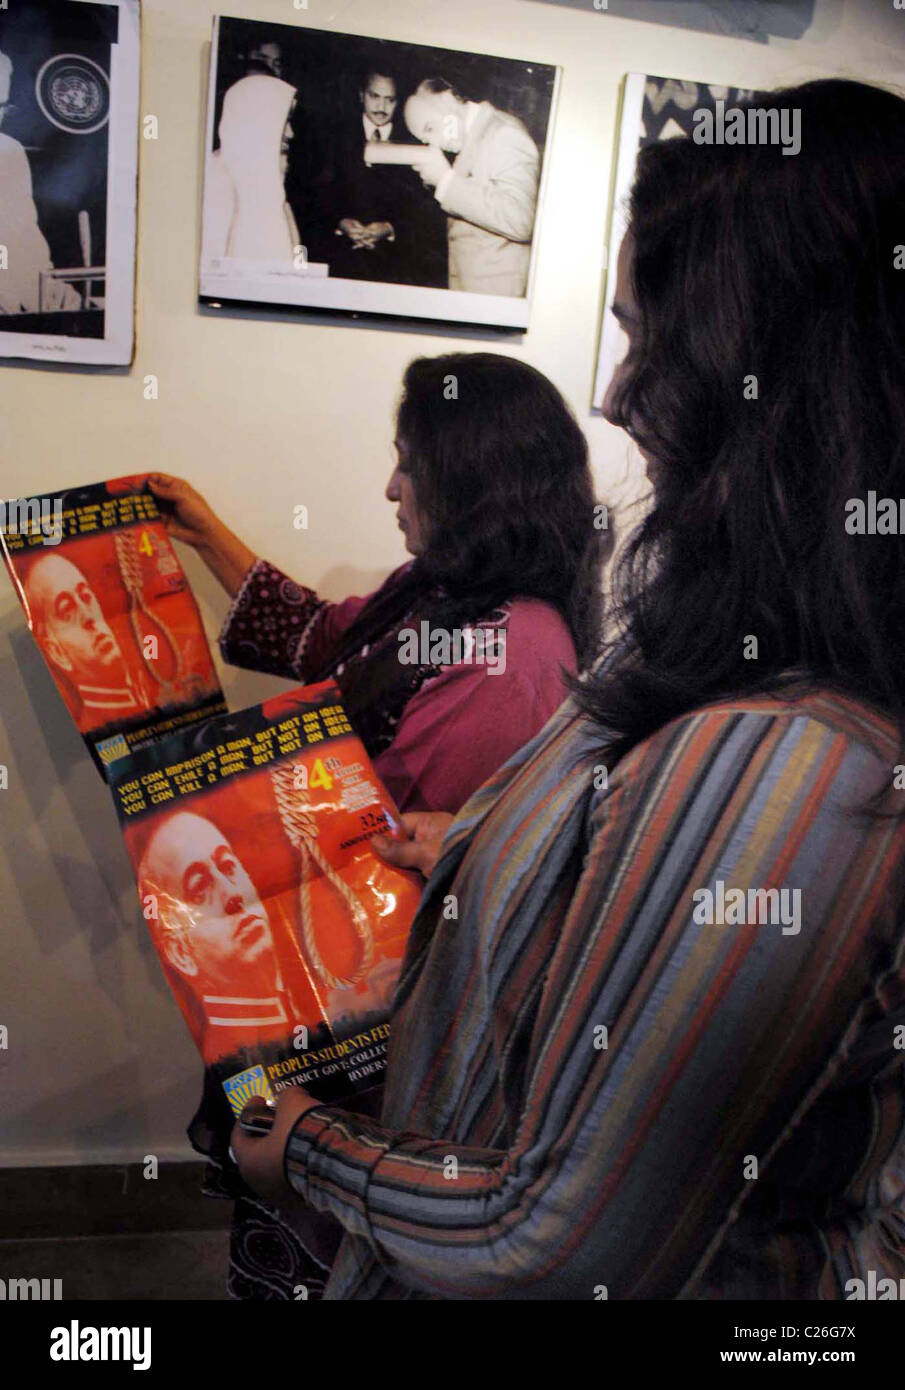 Women take keen interest in pictures of Zulfiqar Ali Bhutto Founder of Peoples Party (PPP) during an exhibition Stock Photo